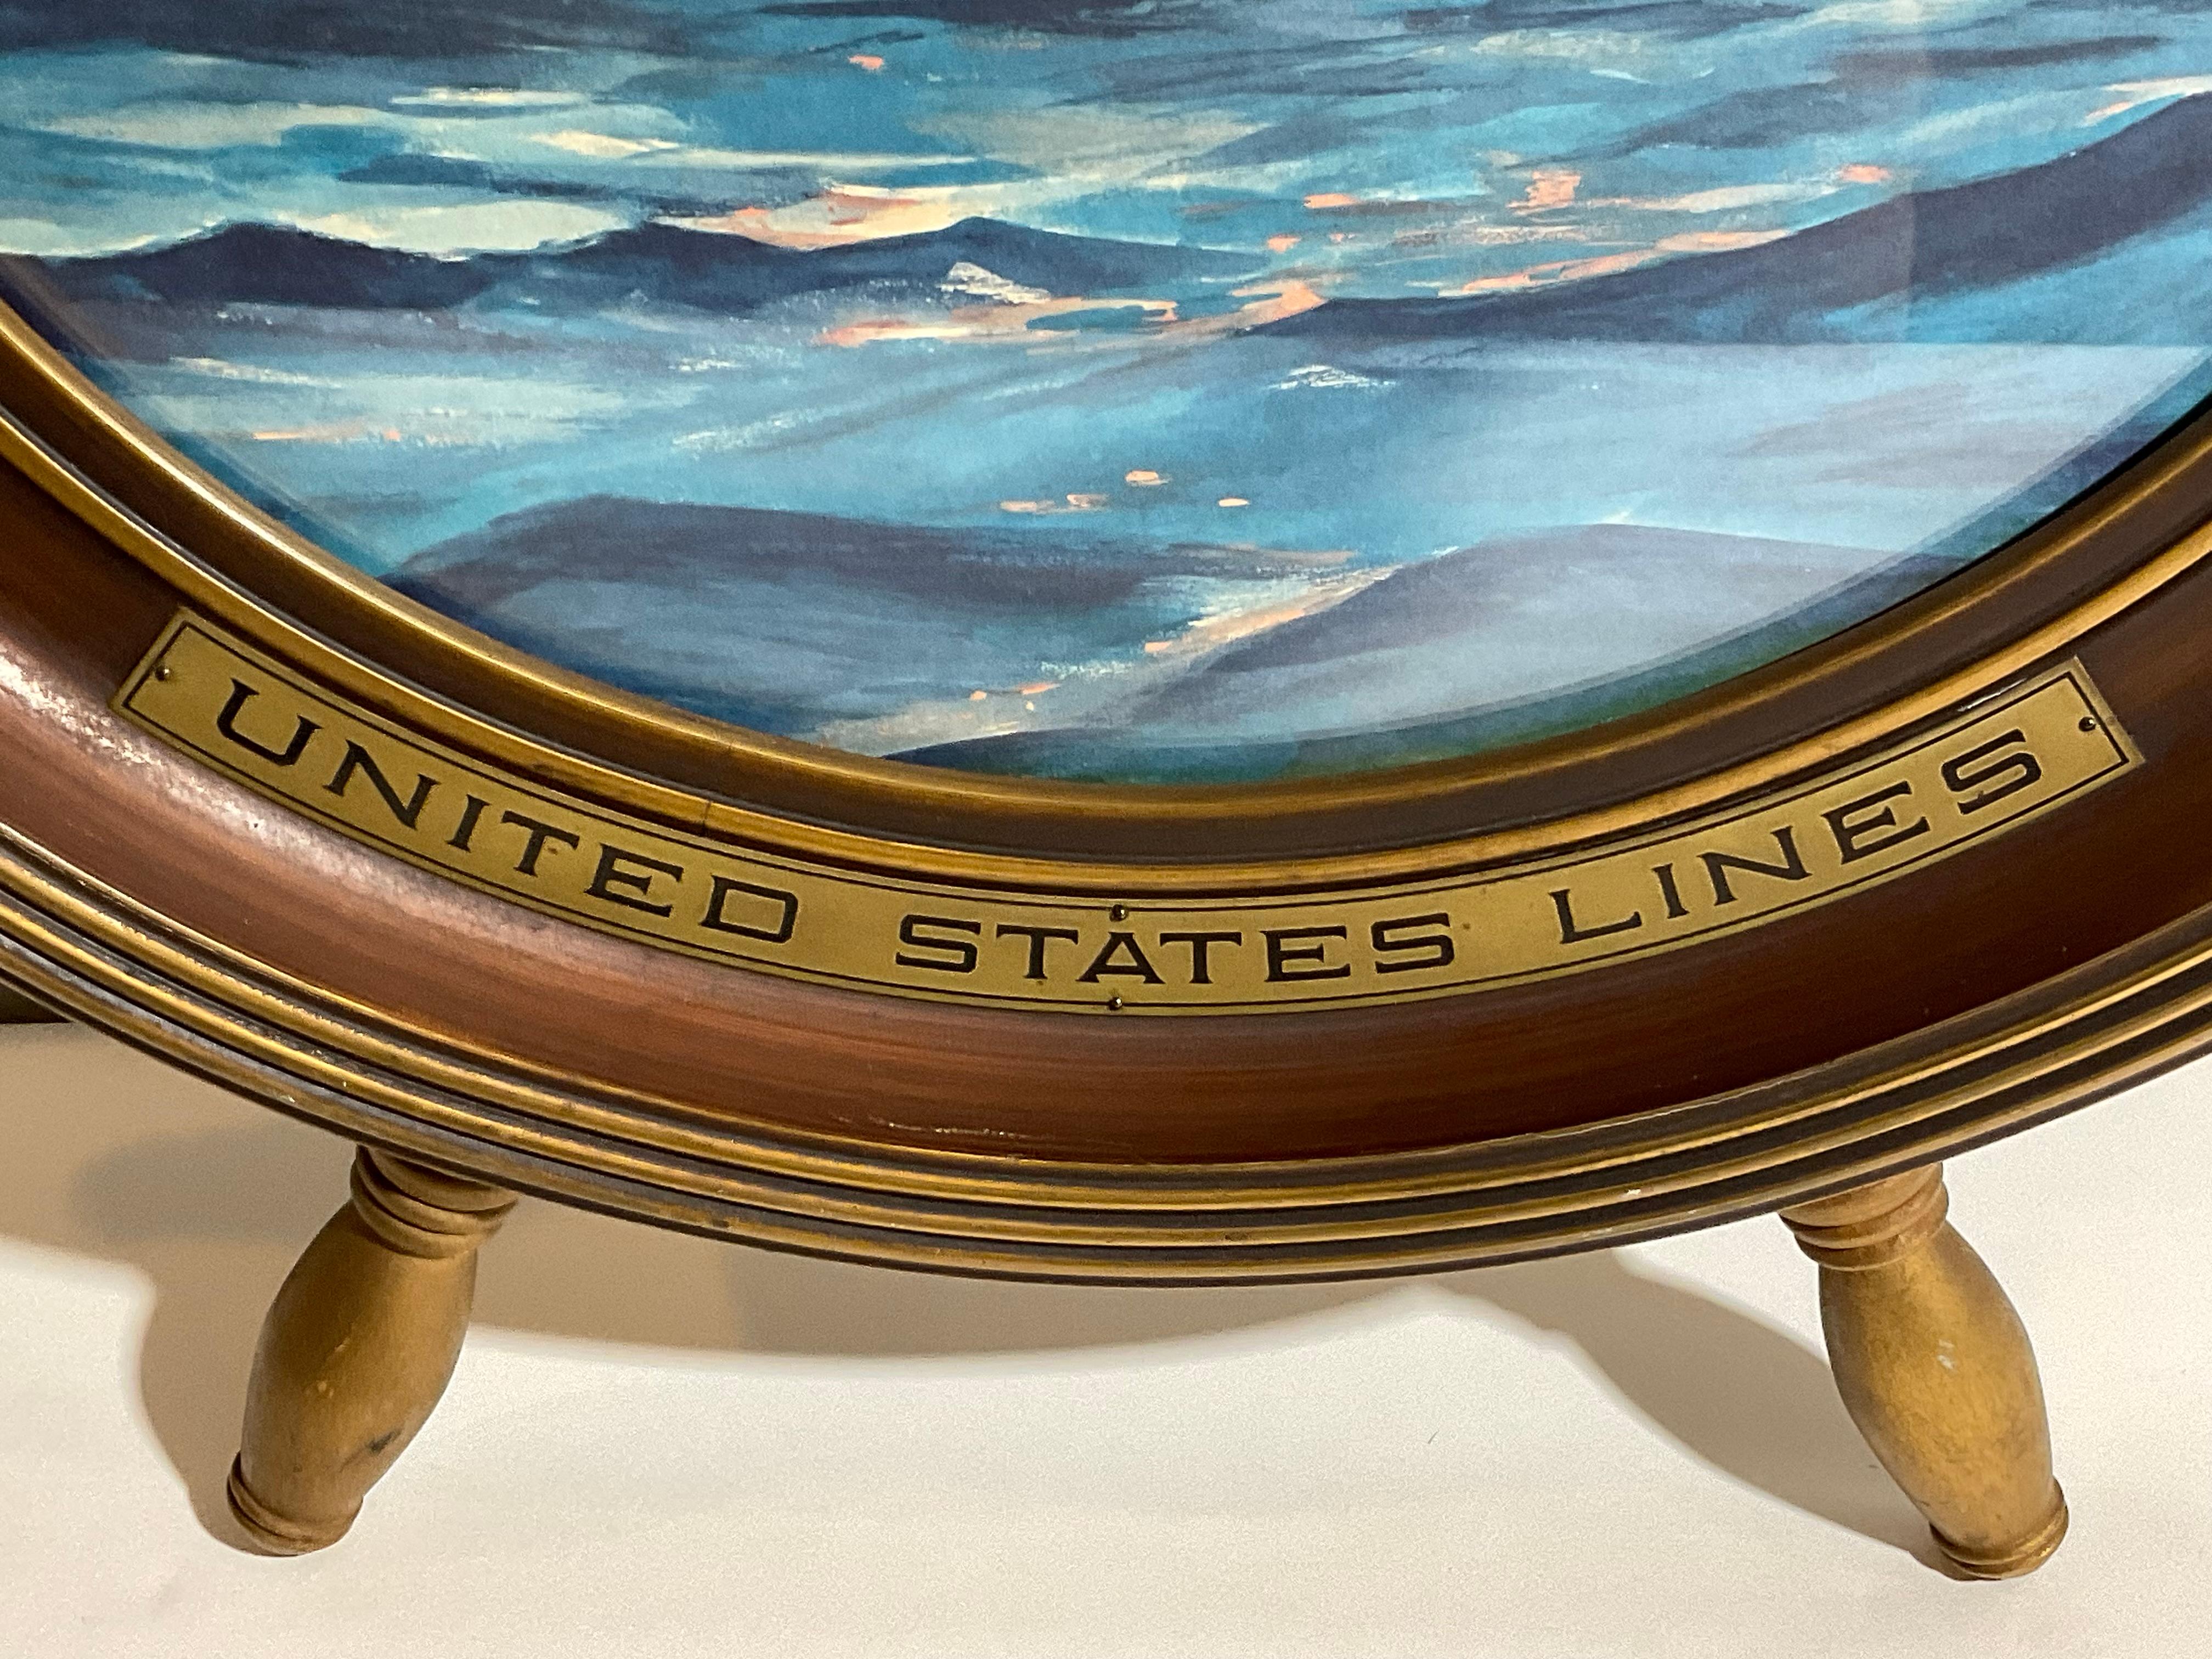 United States Lines Framed Poster In Good Condition For Sale In Norwell, MA